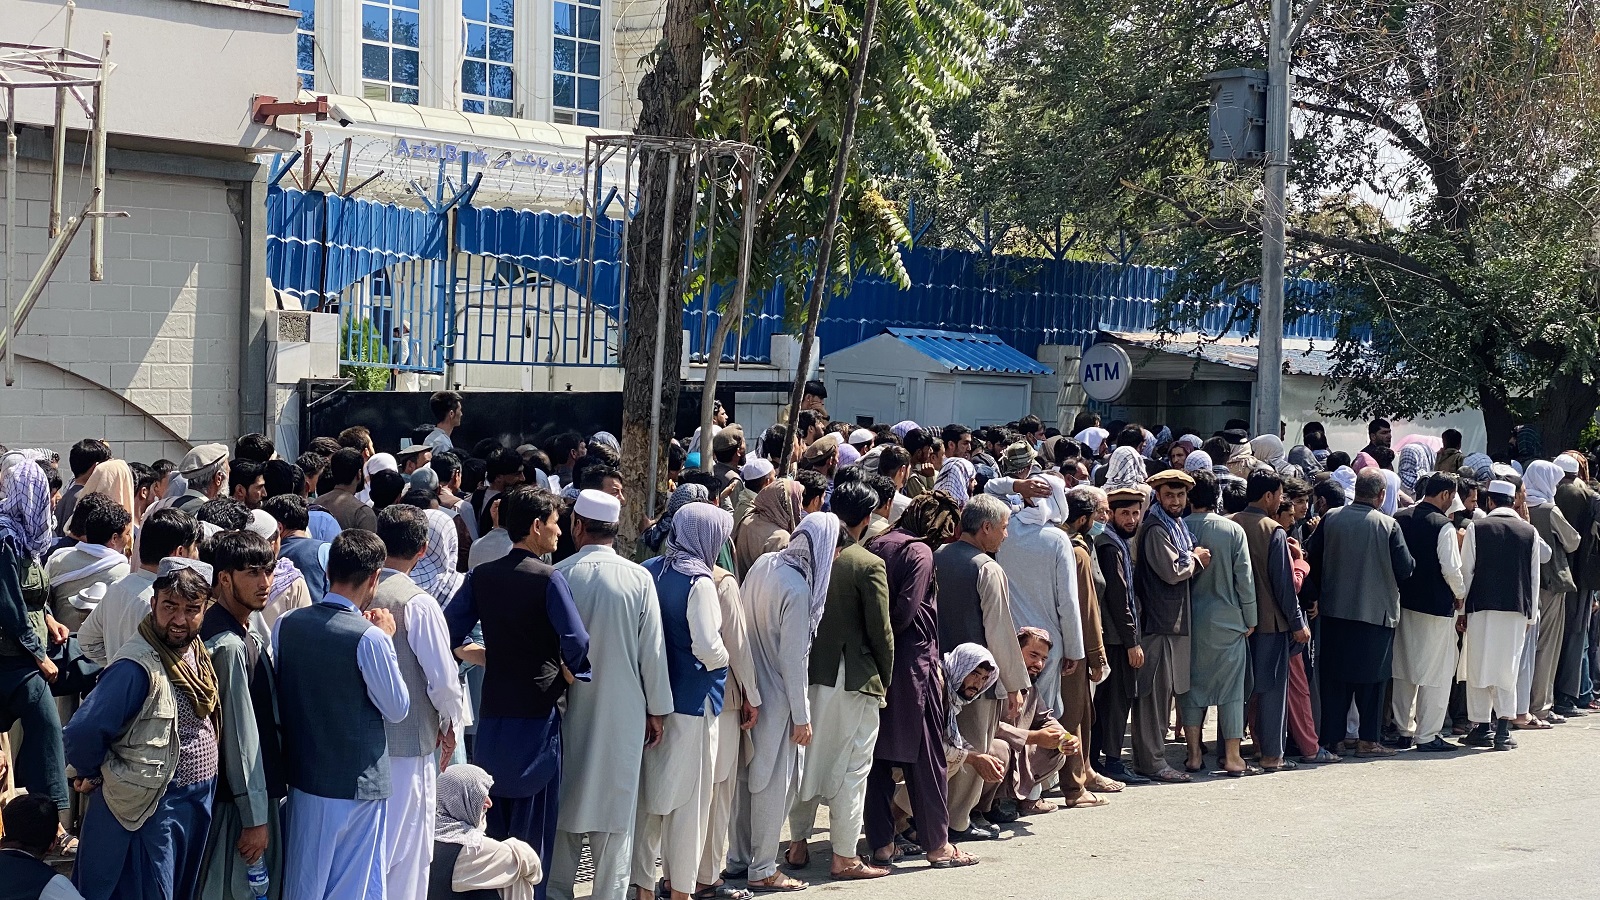 epa09440005 People line up to withdraw money from banks as banks allowed only $200 withdrawal per week from an account at their central branches in Kabul, Afgahnistan, 01 September 2021. The Taliban called for support from the international community to revive an economy battered by two decades of conflict and heavily dependent on foreign aid. Chief Taliban spokesman Zabihullah Mujahid said one of the main objectives after the Taliban's "victory" is the reconstruction of the country and assured that the international community must trust that the aid to Afghanistan under the Taliban will be directed through “proper channels”.  EPA/STRINGER